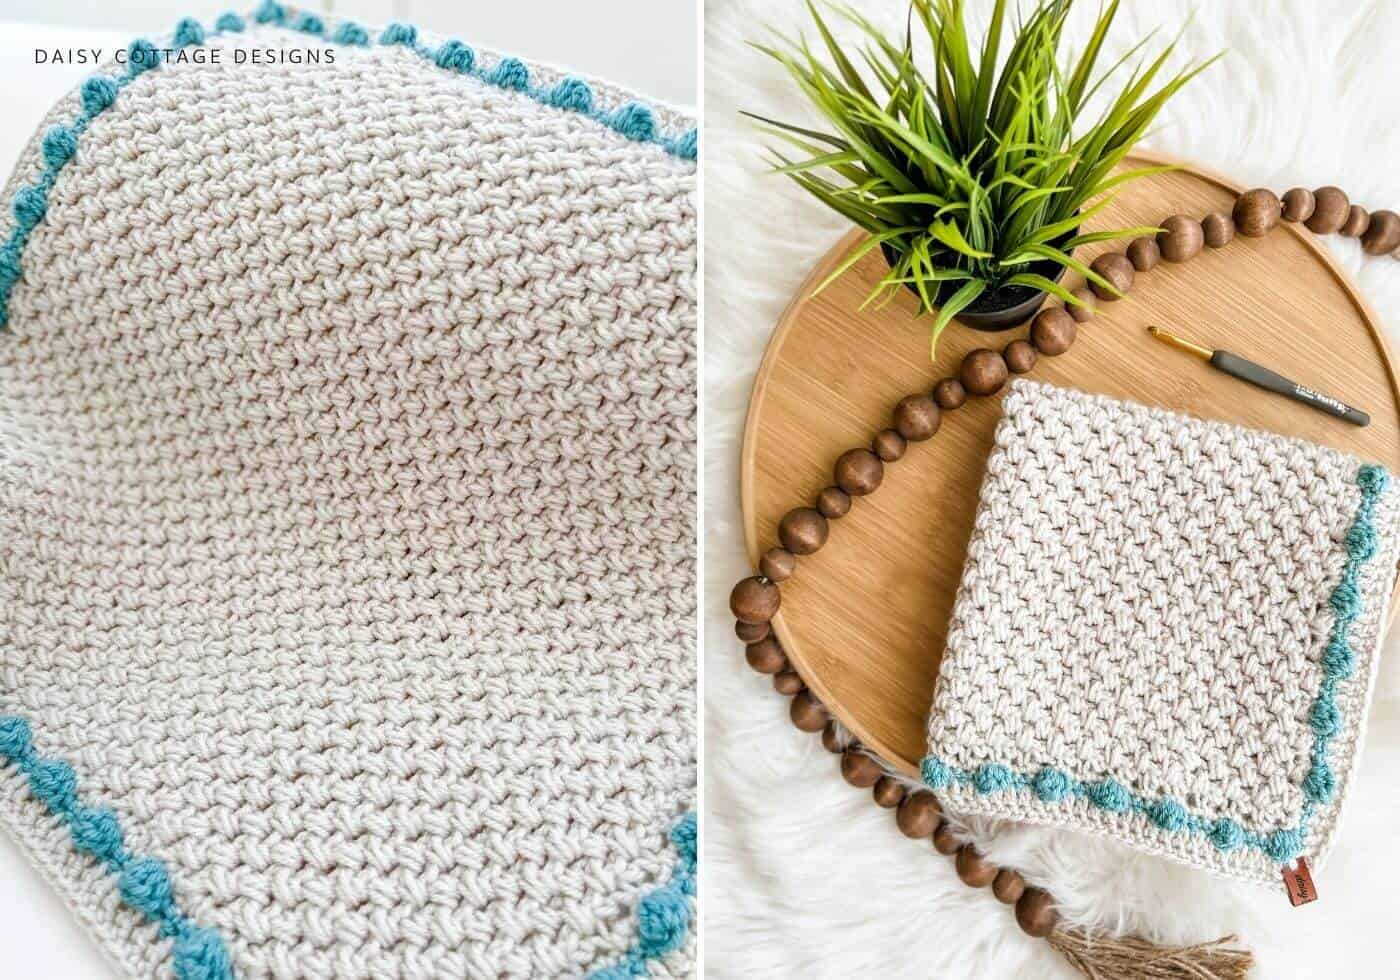 Pretty neutral blanket with bobble border pattern